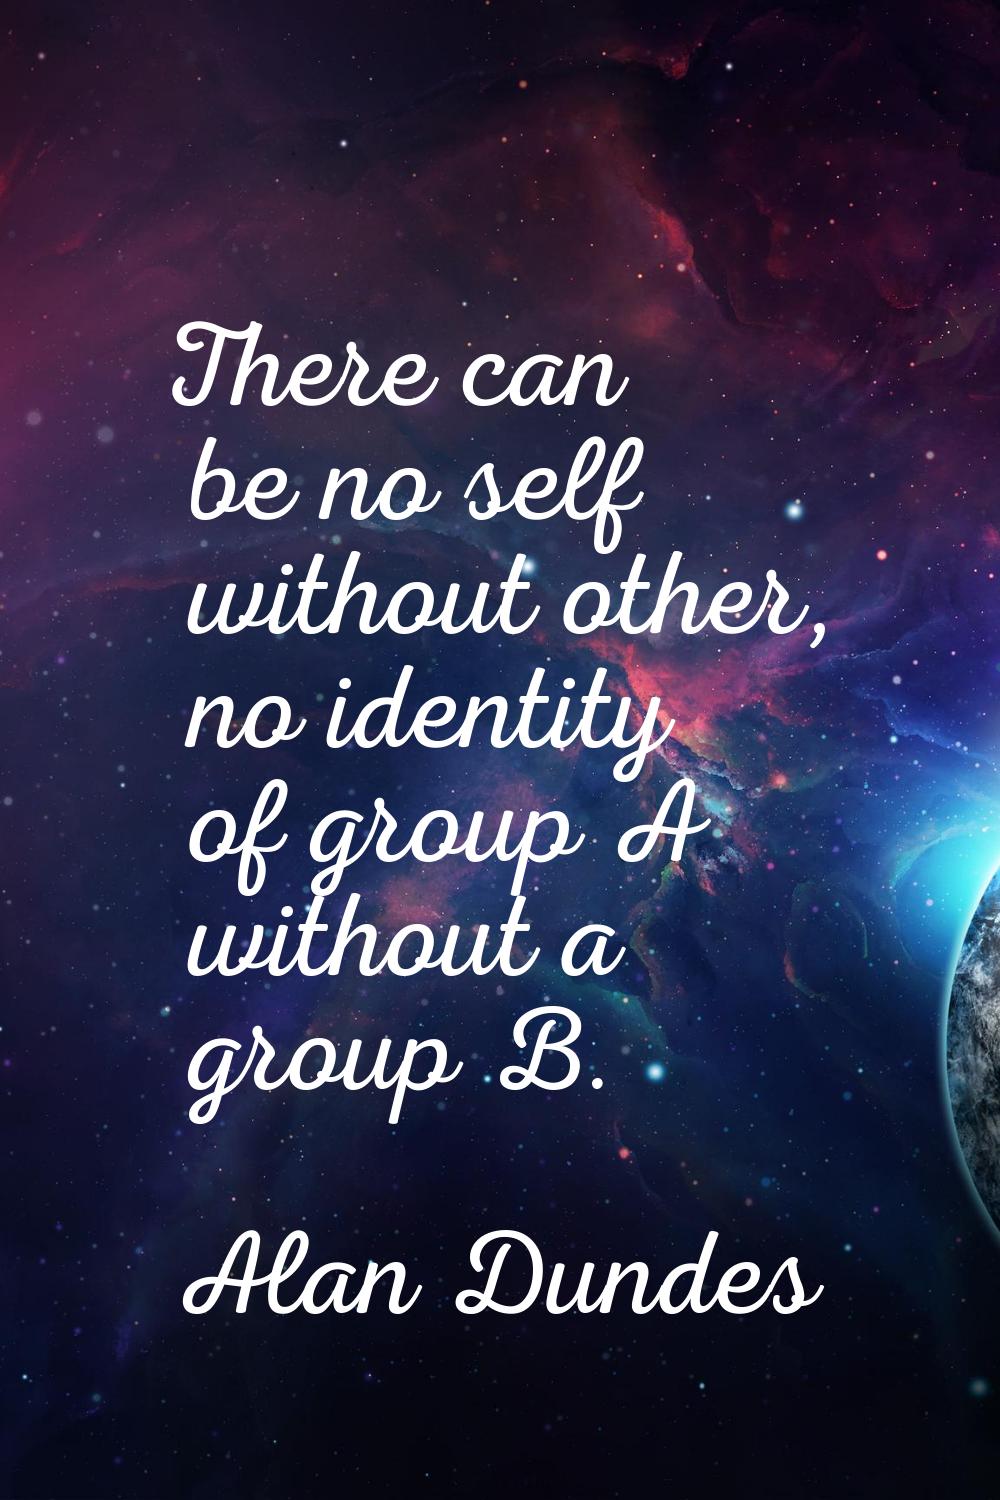 There can be no self without other, no identity of group A without a group B.